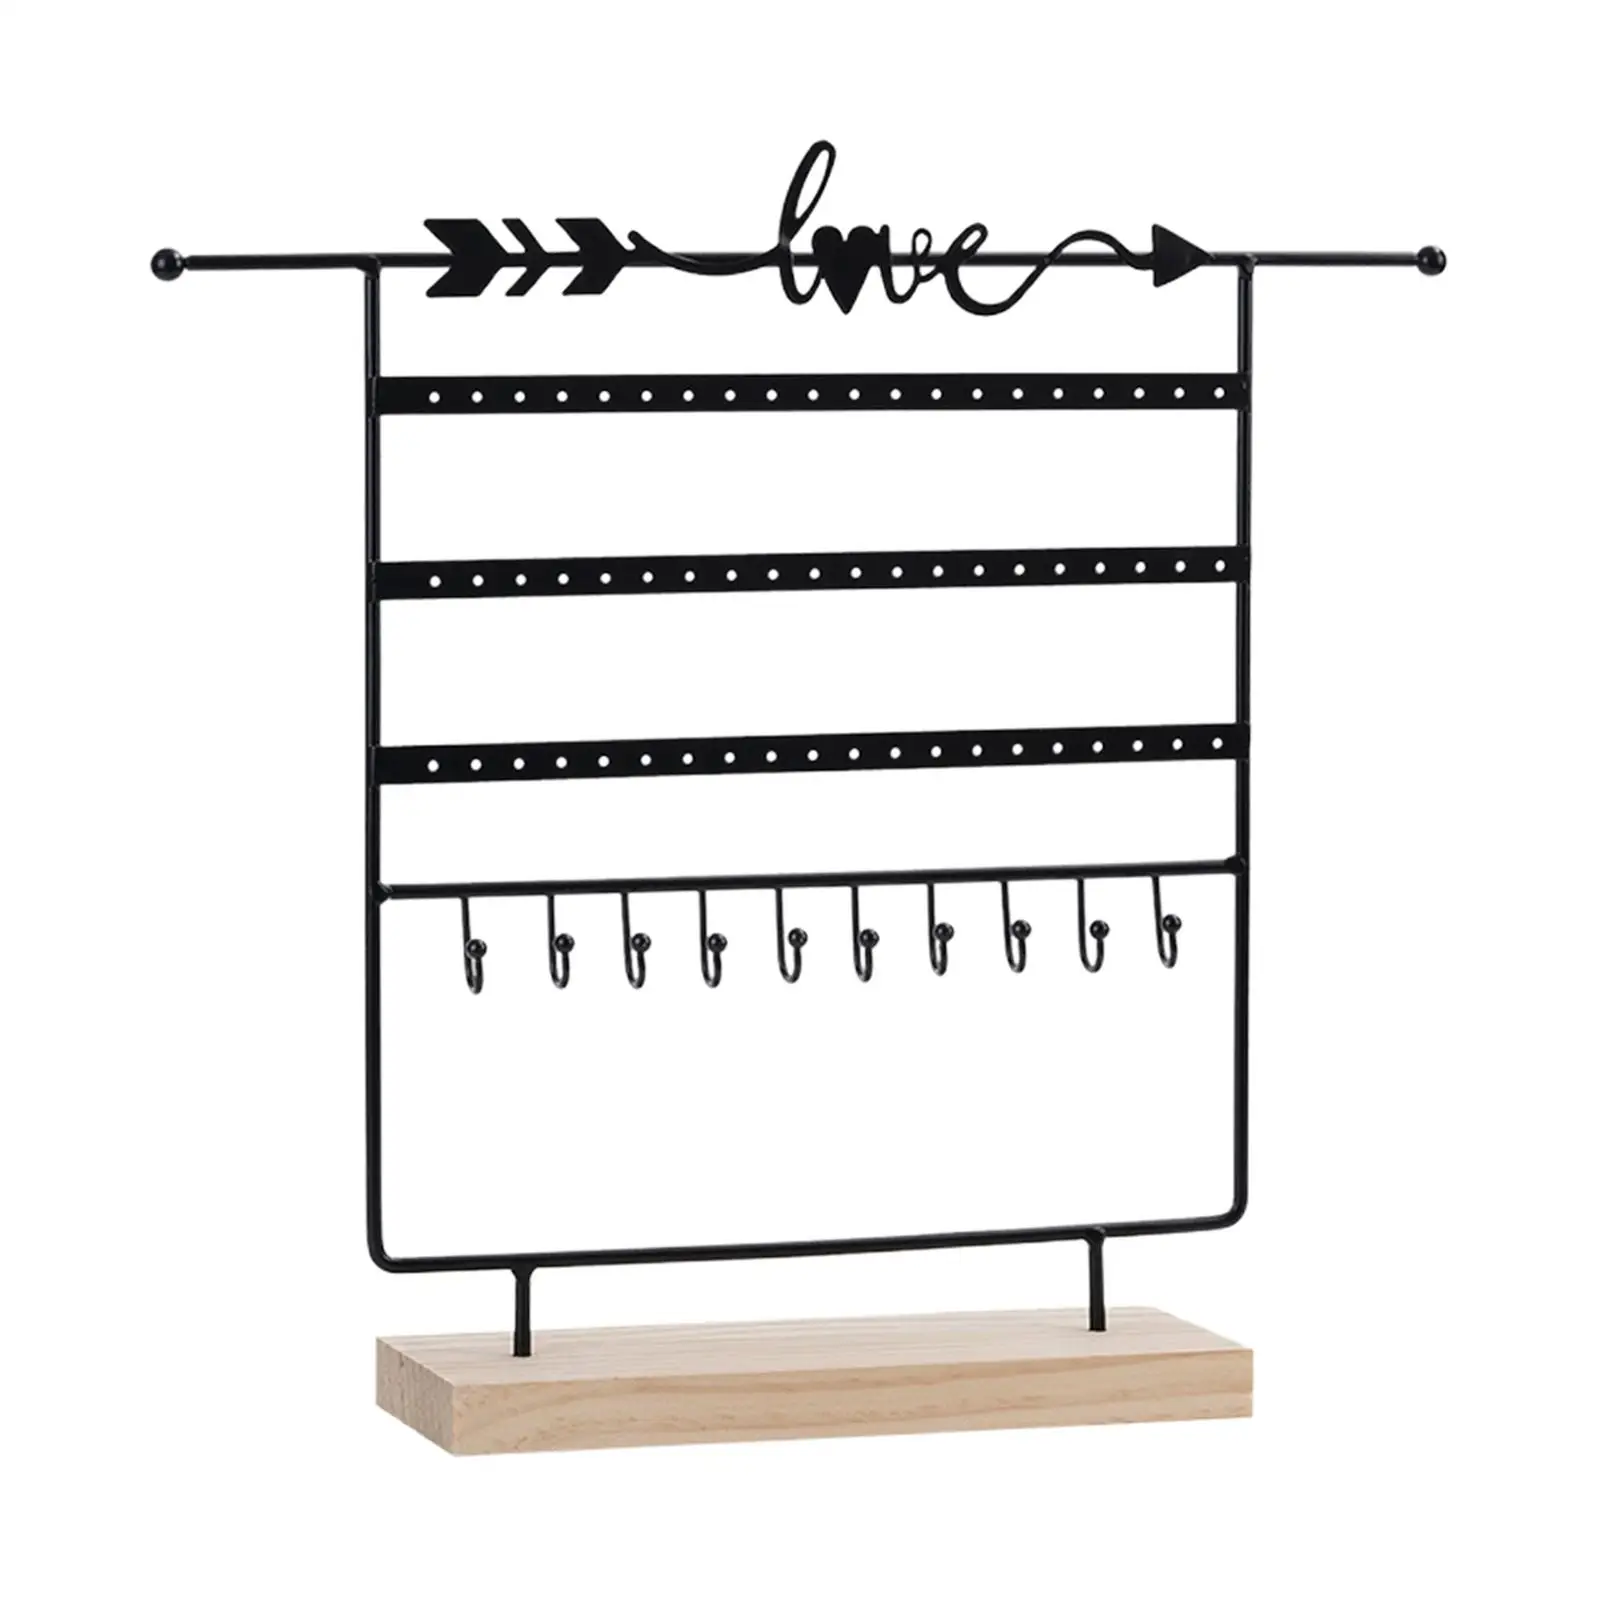 Jewelry Earring Organizer Holder with Wooden Base Decoration for Dresser Bedroom